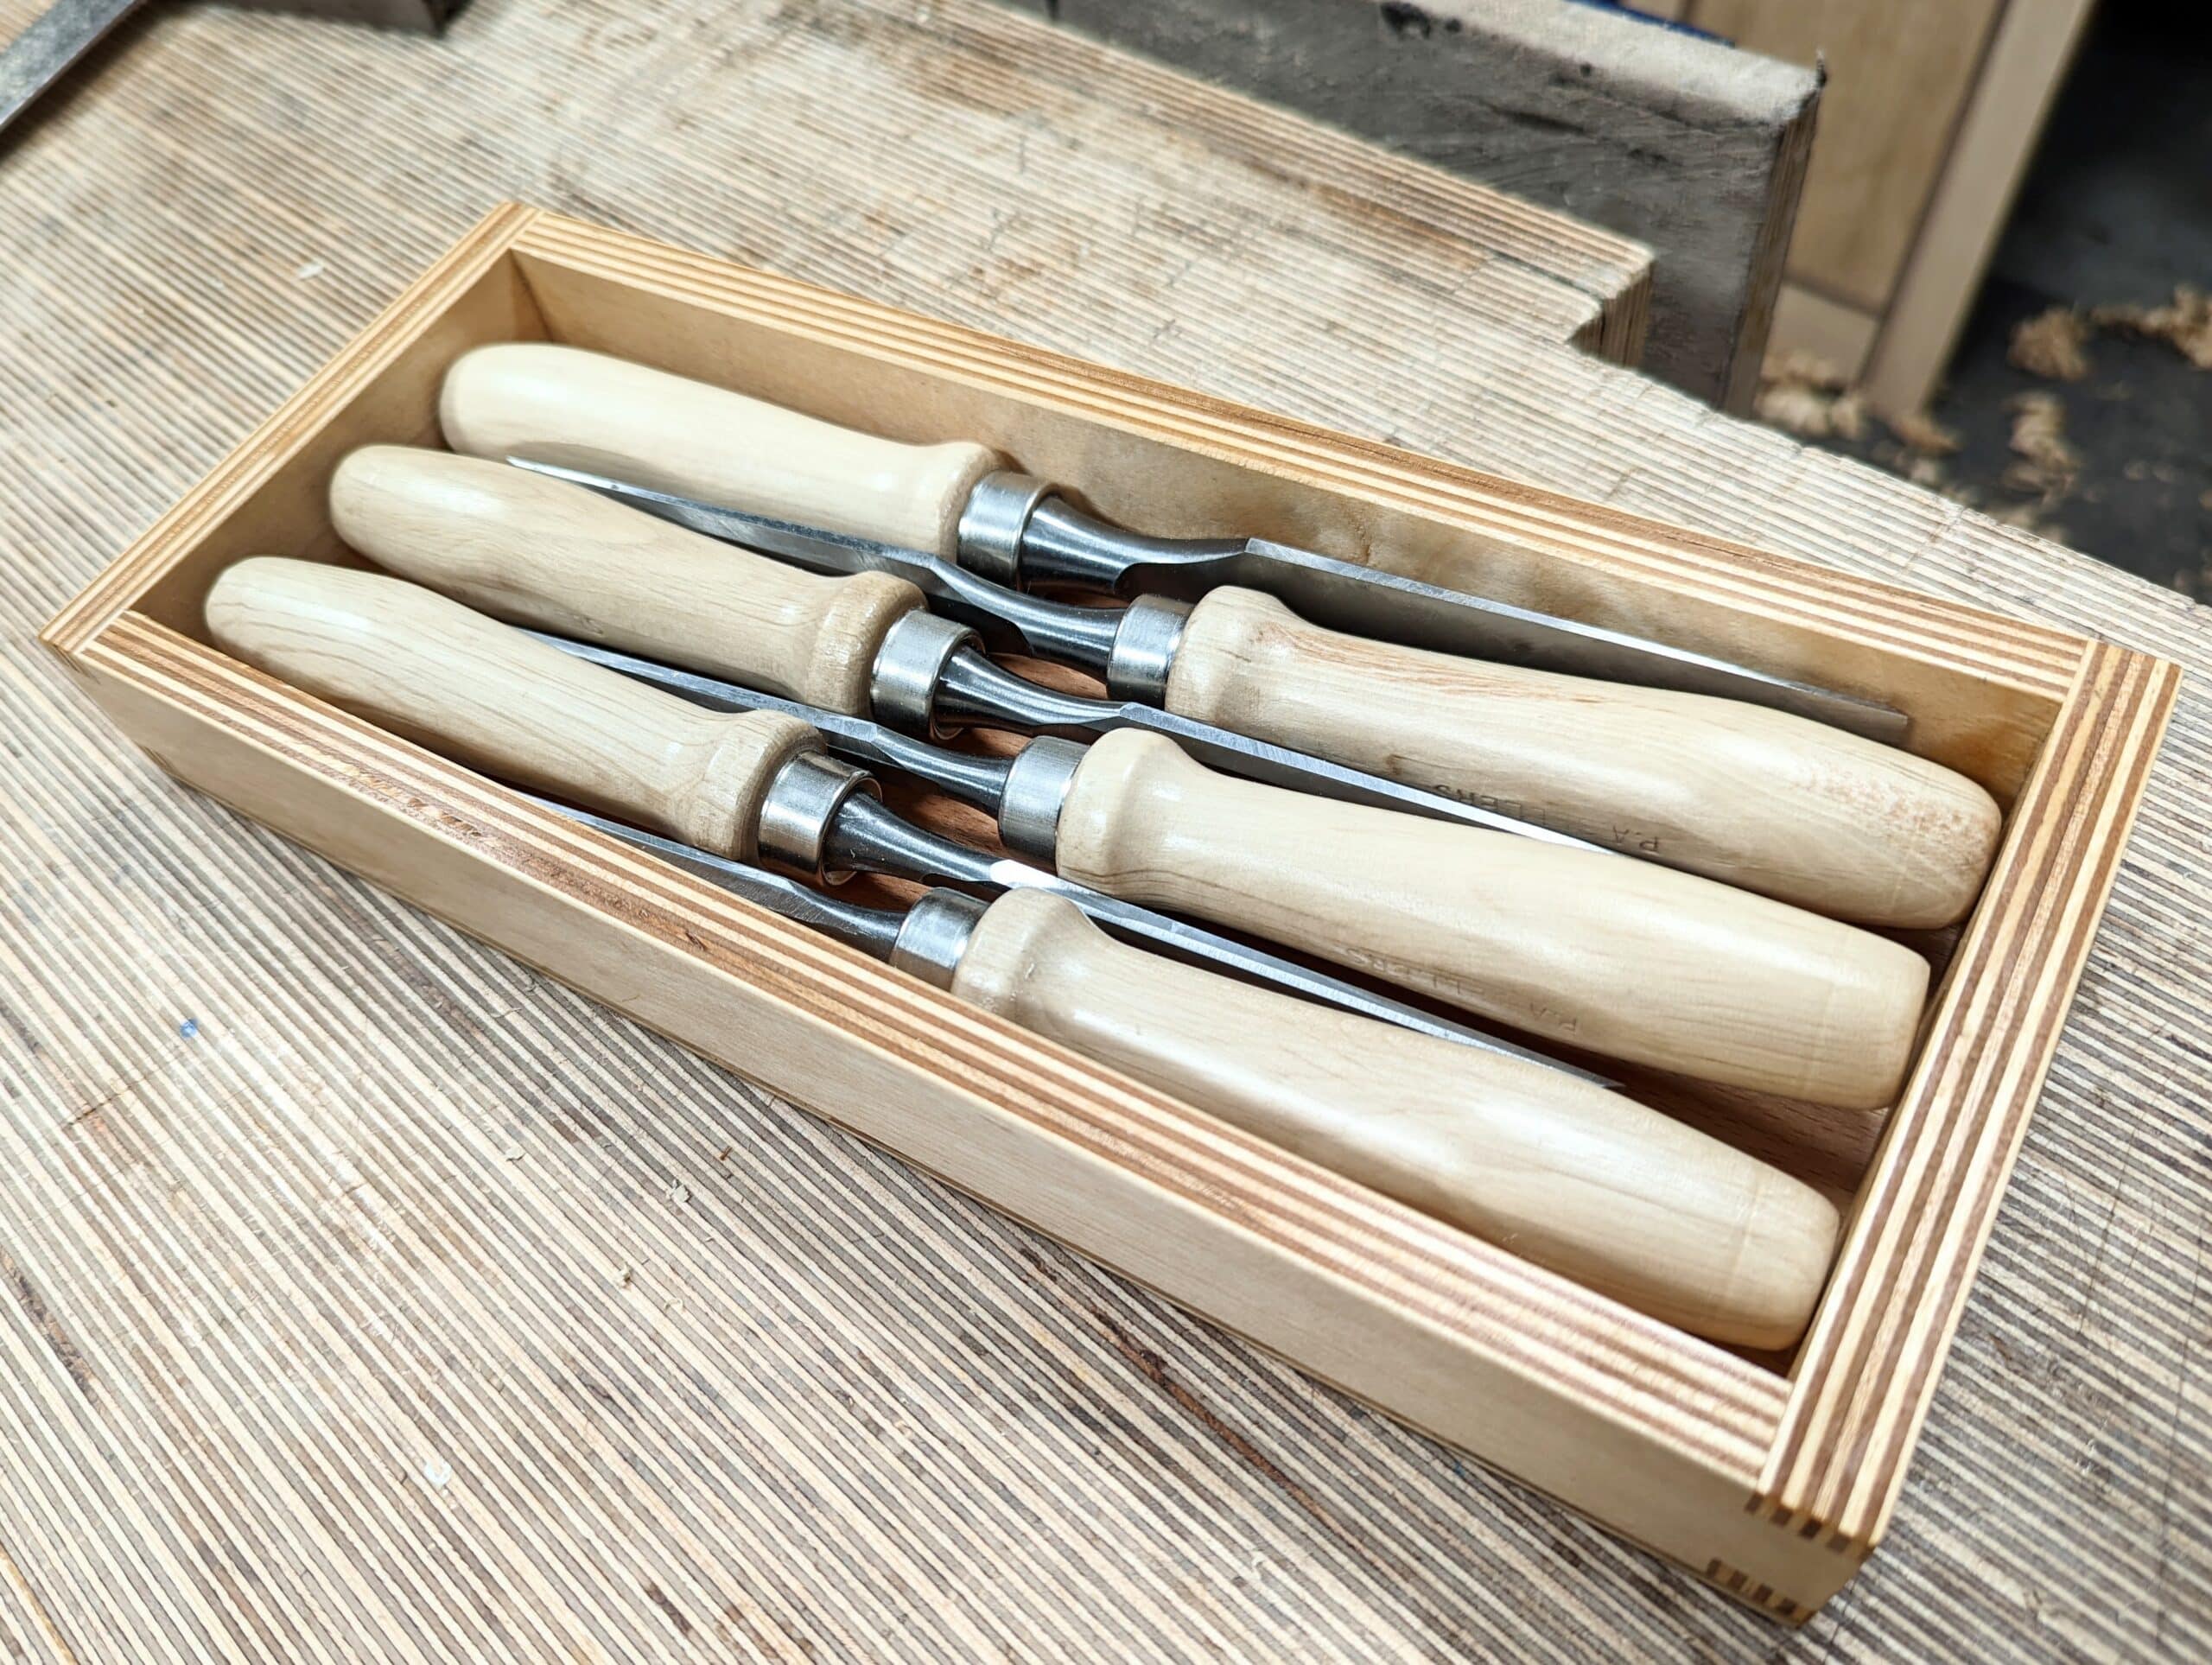 Which Chisels Should You Buy? - Paul Sellers' Blog